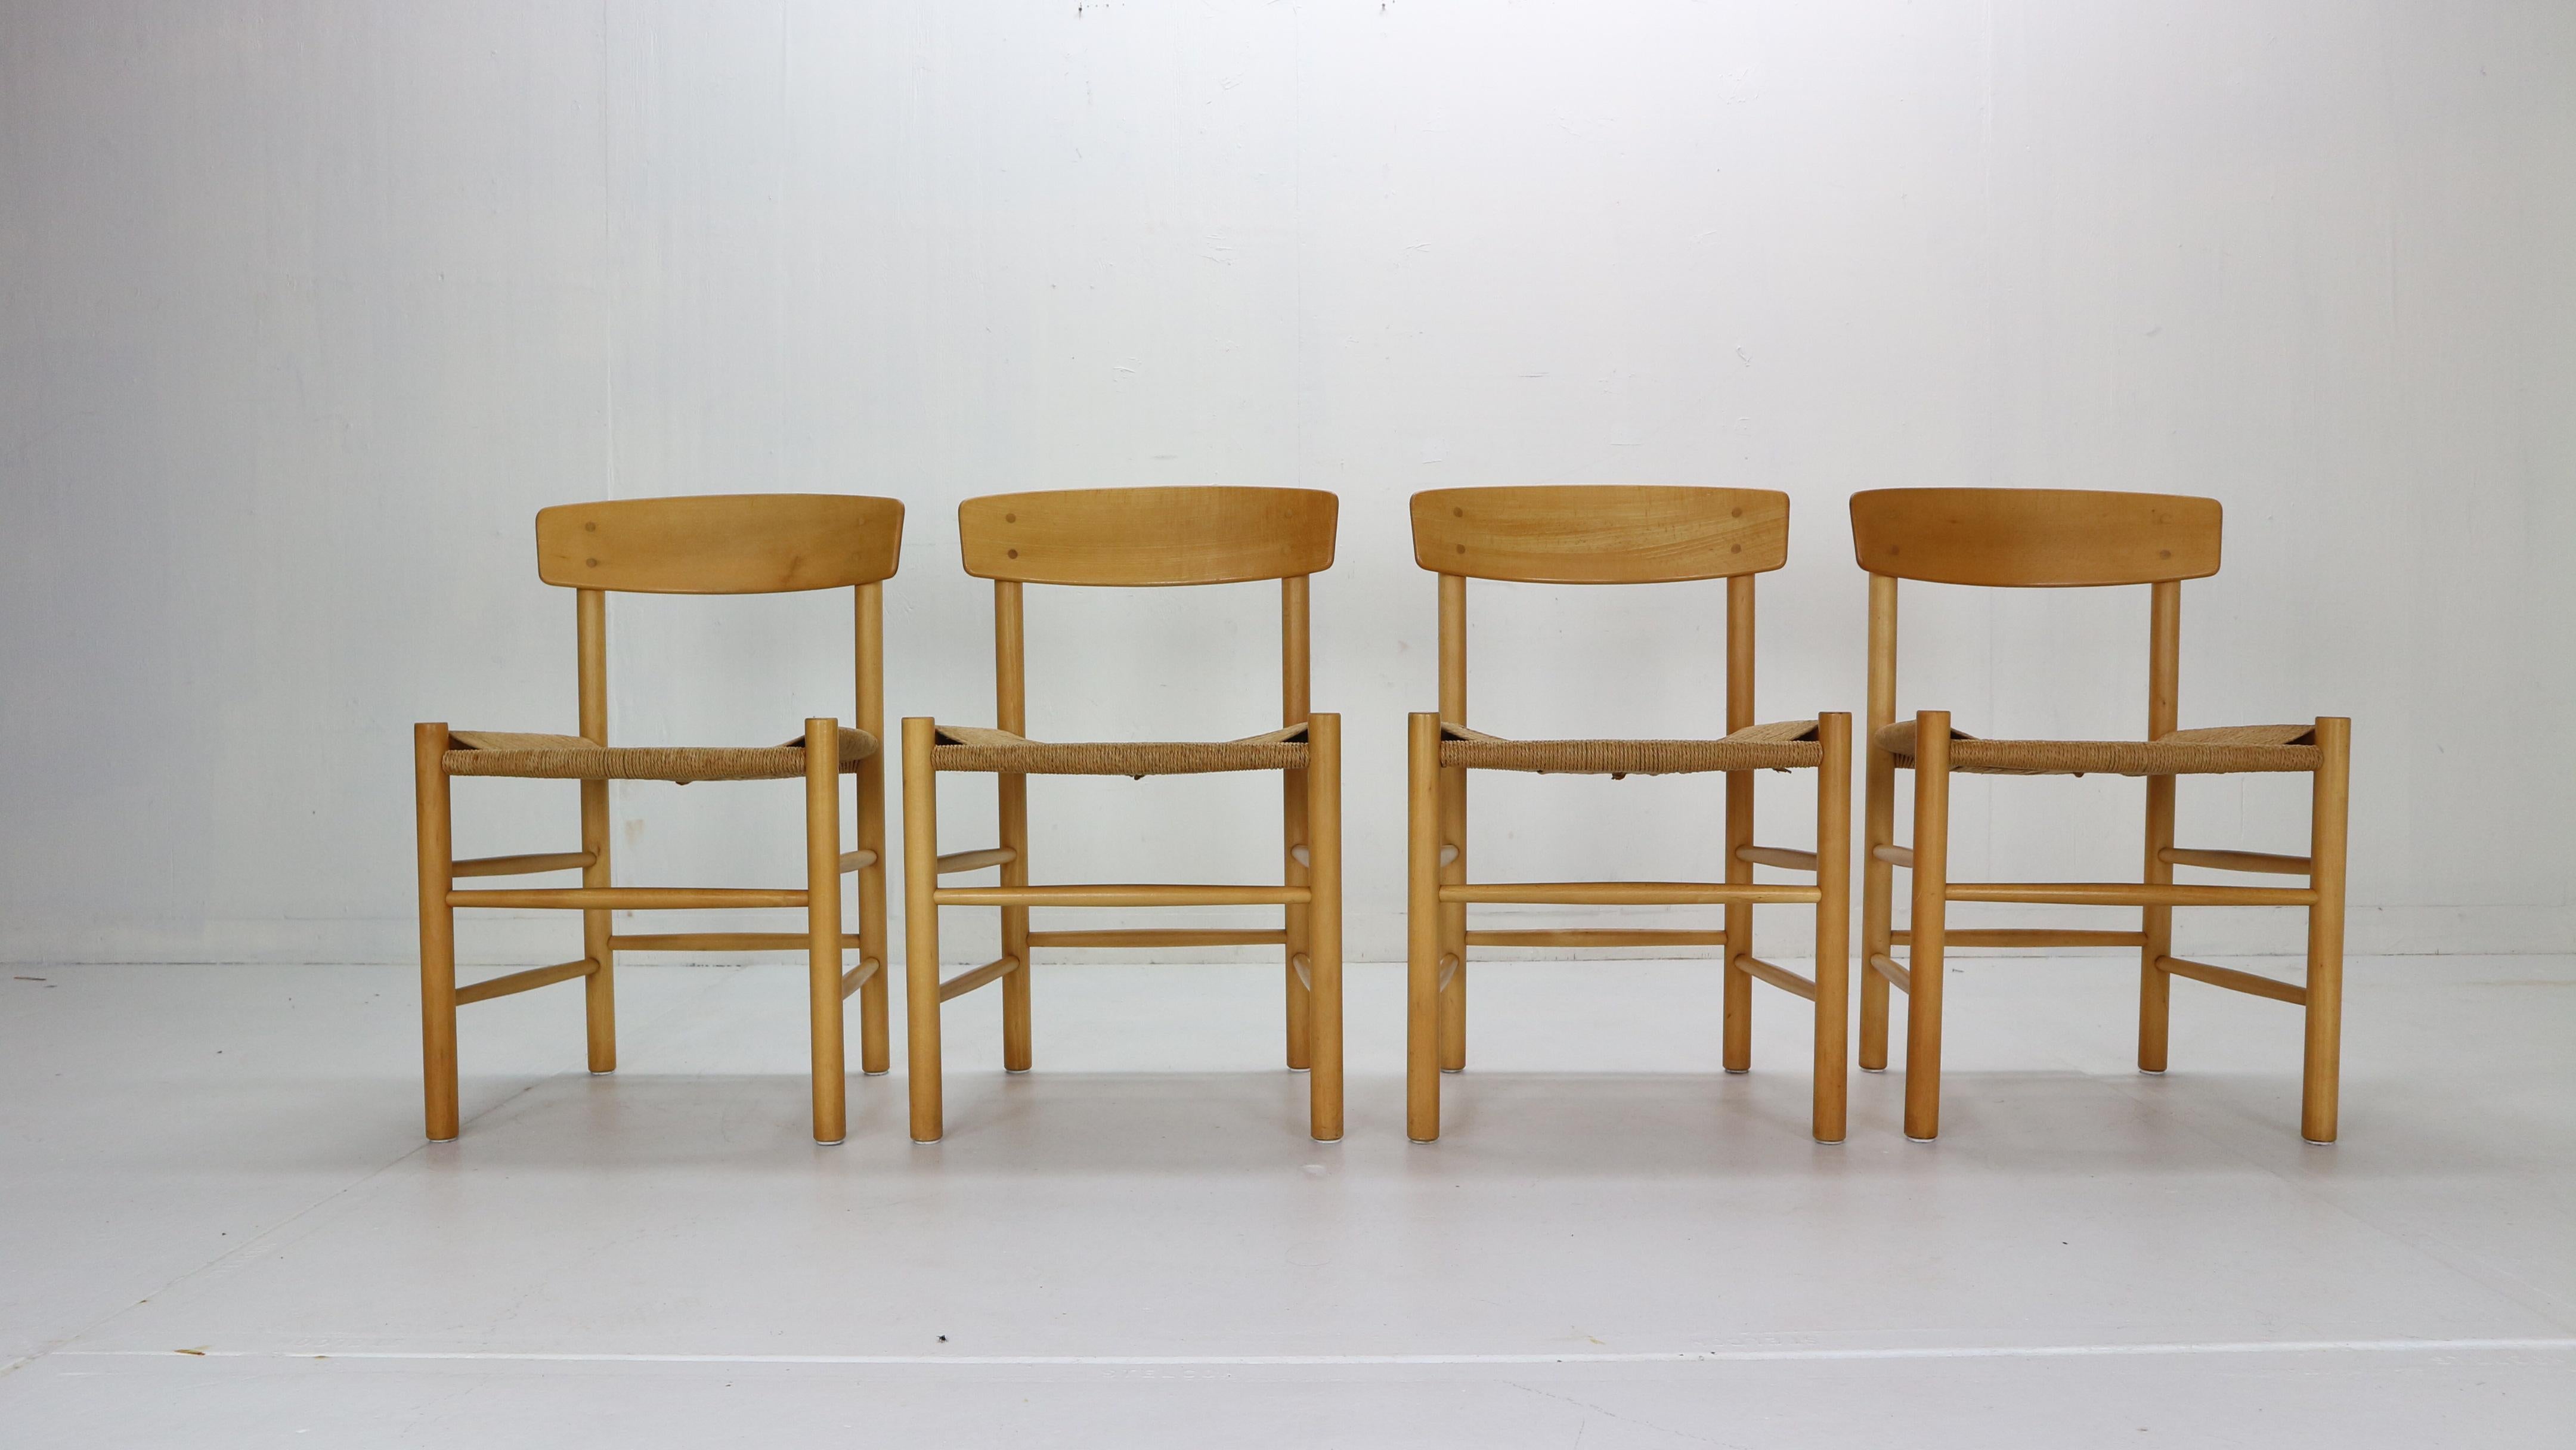 Scandinavian Modern period set of 4 stunning dining room chairs were designed by Børge Mogensen in 1947 for FDB Møbler Danish manufacture.
Due to its different use in private as well as public spaces the chair got called 